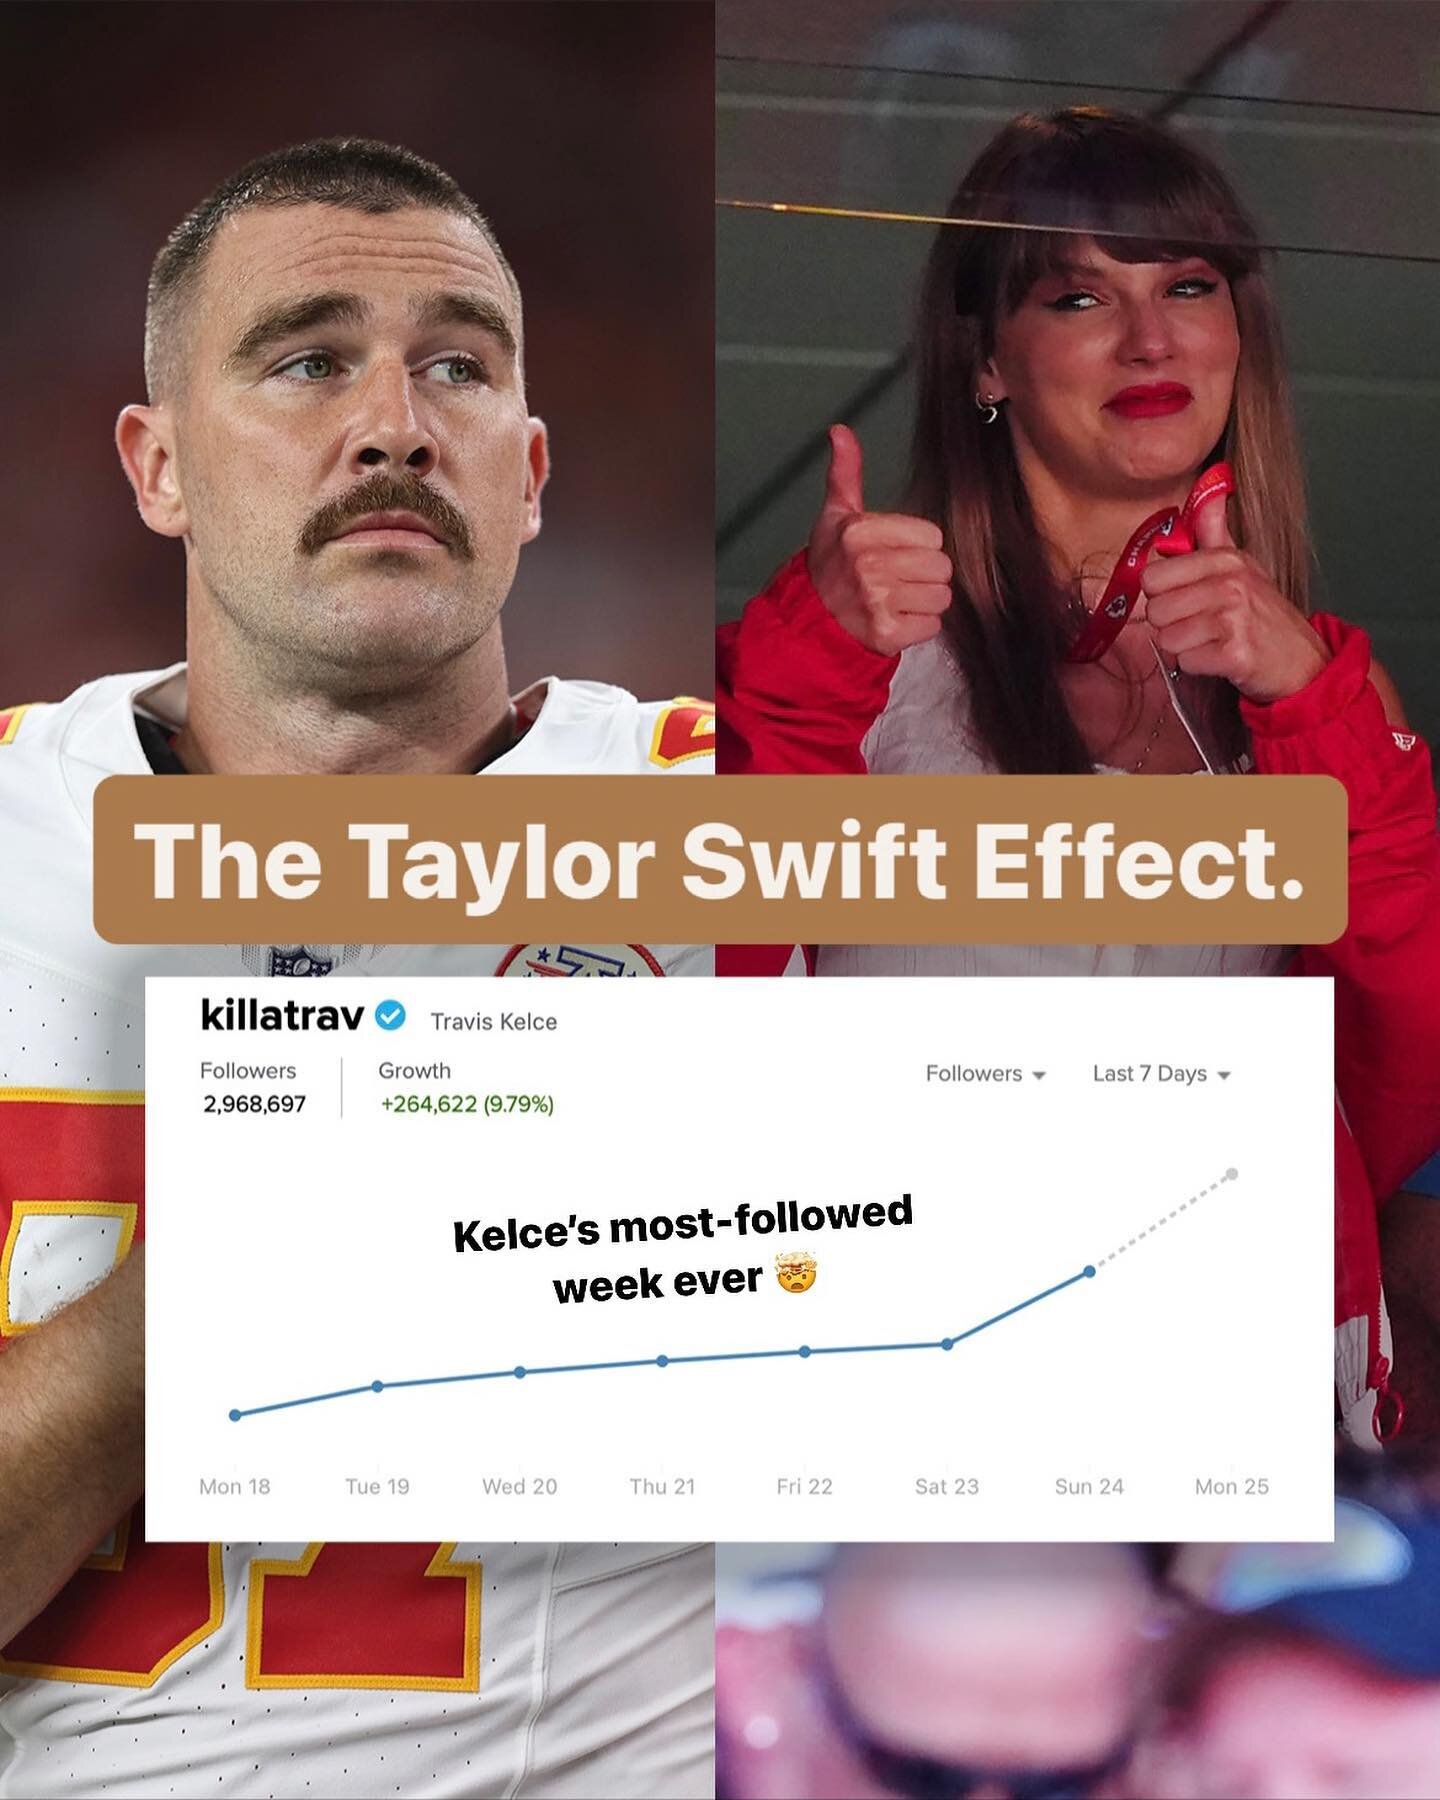 &quot;Electric Touch&quot; (Social Media Version).

Chiefs star Travis Kelce gained over 250,000 Instagram followers last week, and over 80,000 on Sunday alone, amidst his rumored relationship with Taylor Swift.

That's more than Kelce gained after w